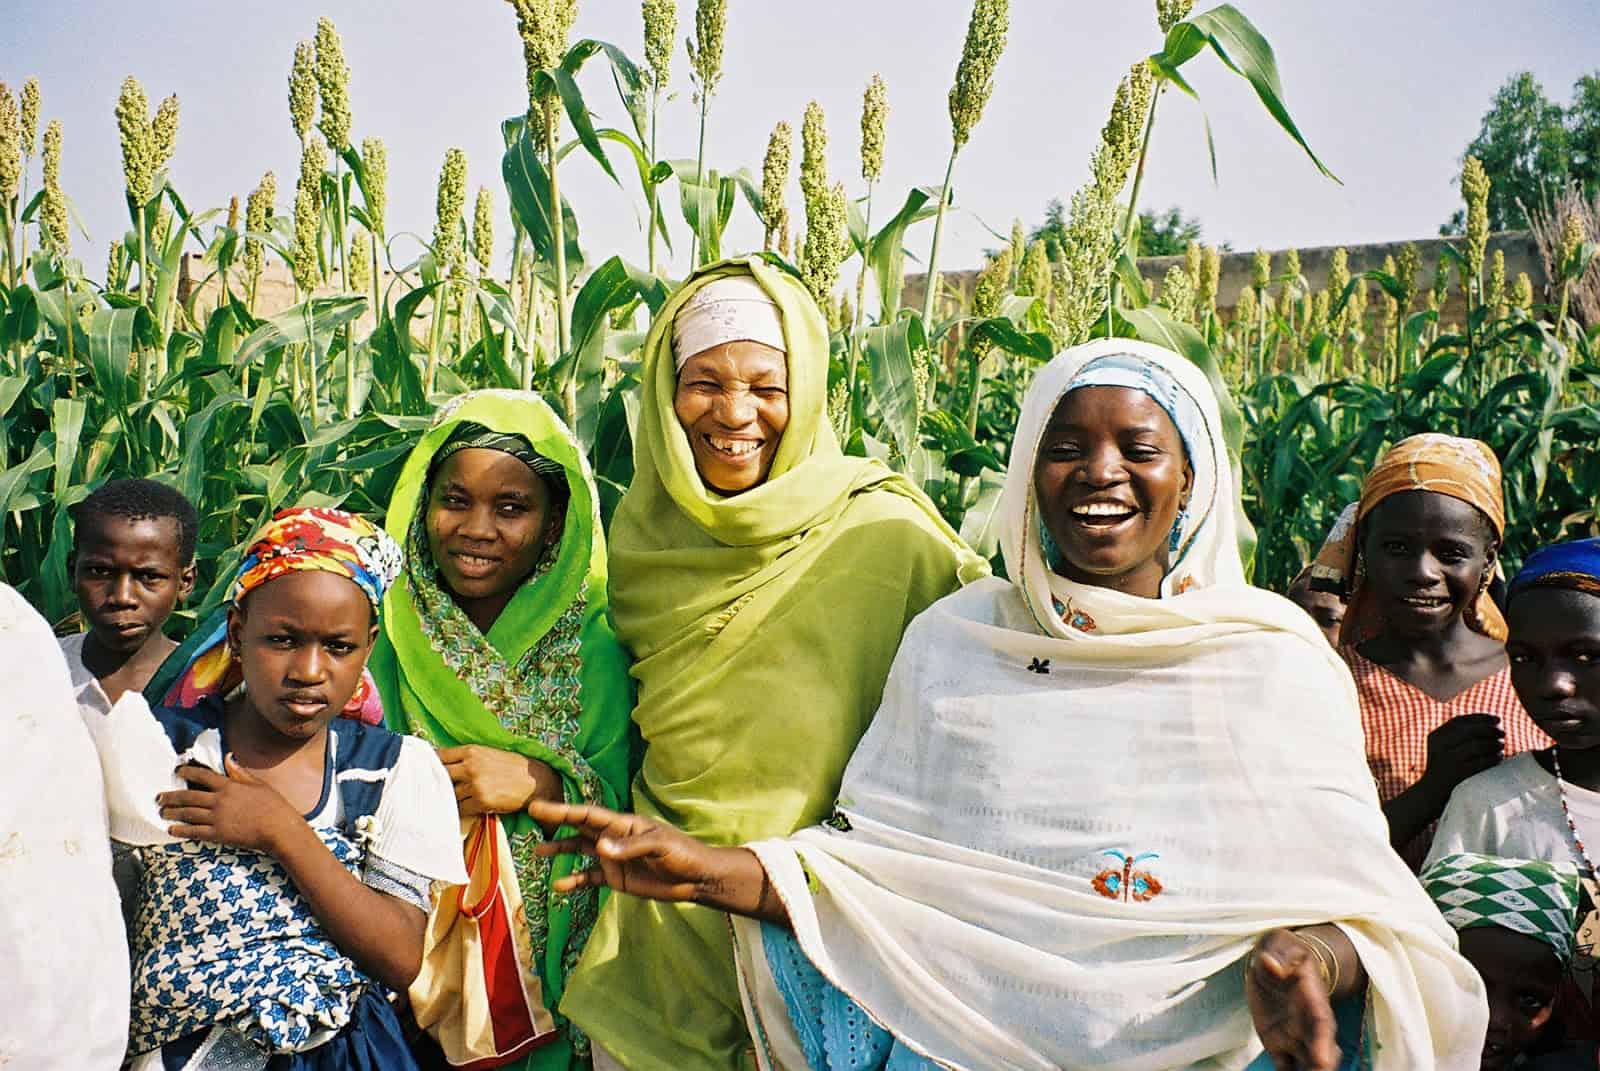 USAID works with Nigerians to improve agriculture, health, education, and governance (2005) | A. Fleuret/USAID | Flickr